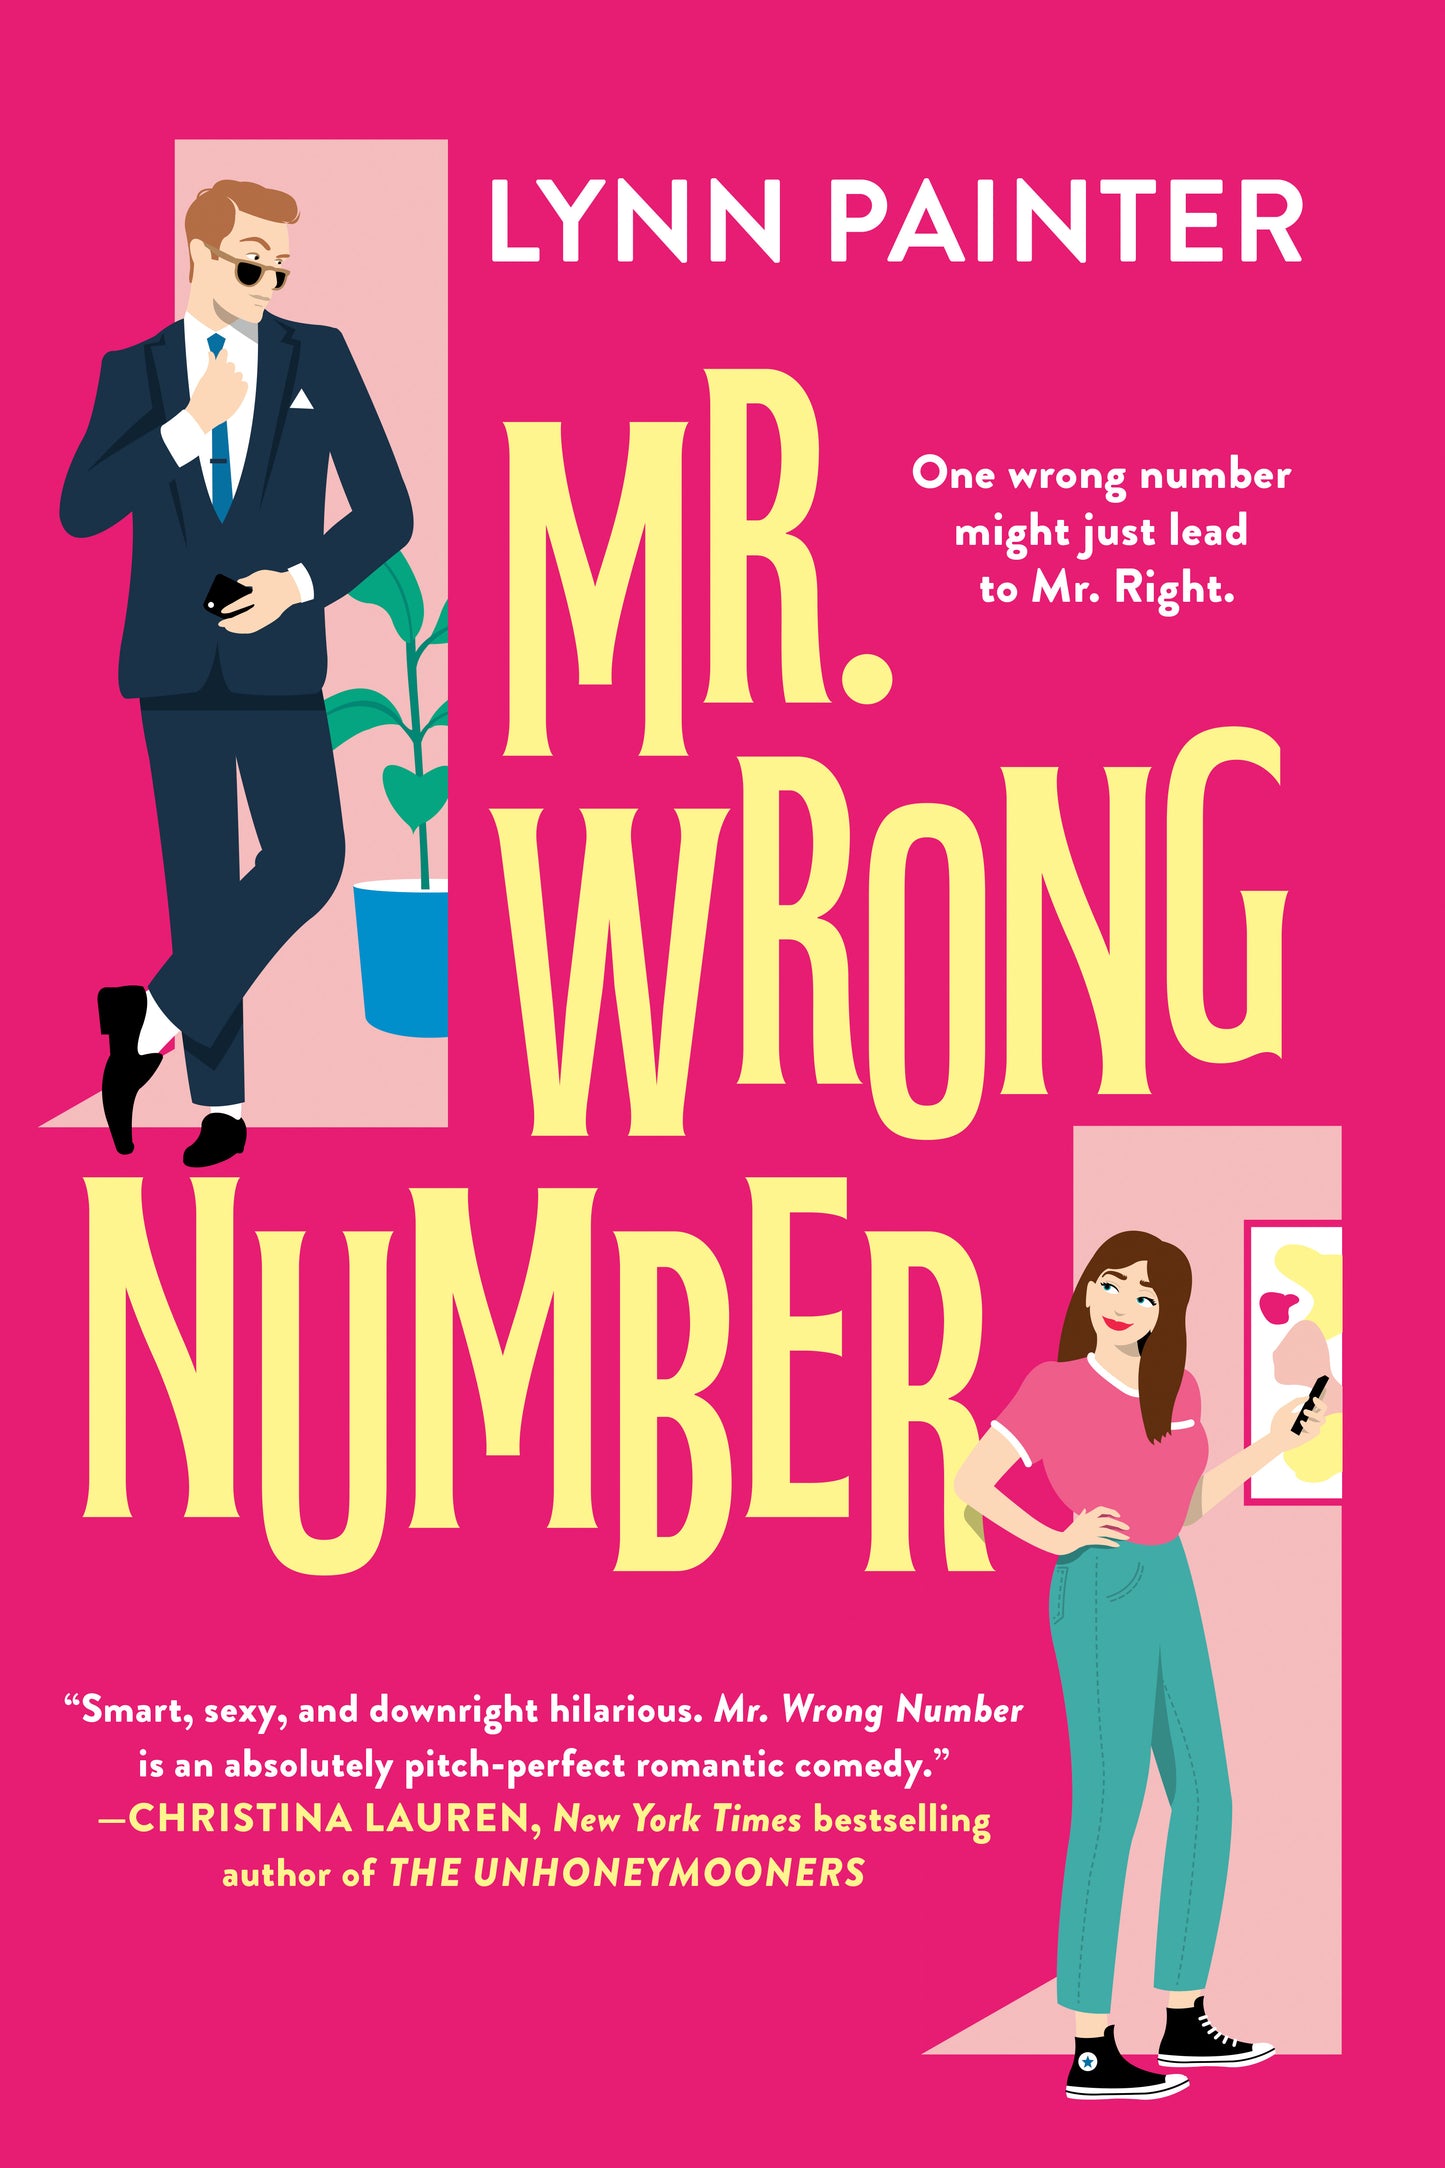 Mr. Wrong Number
Book by Lynn Painter